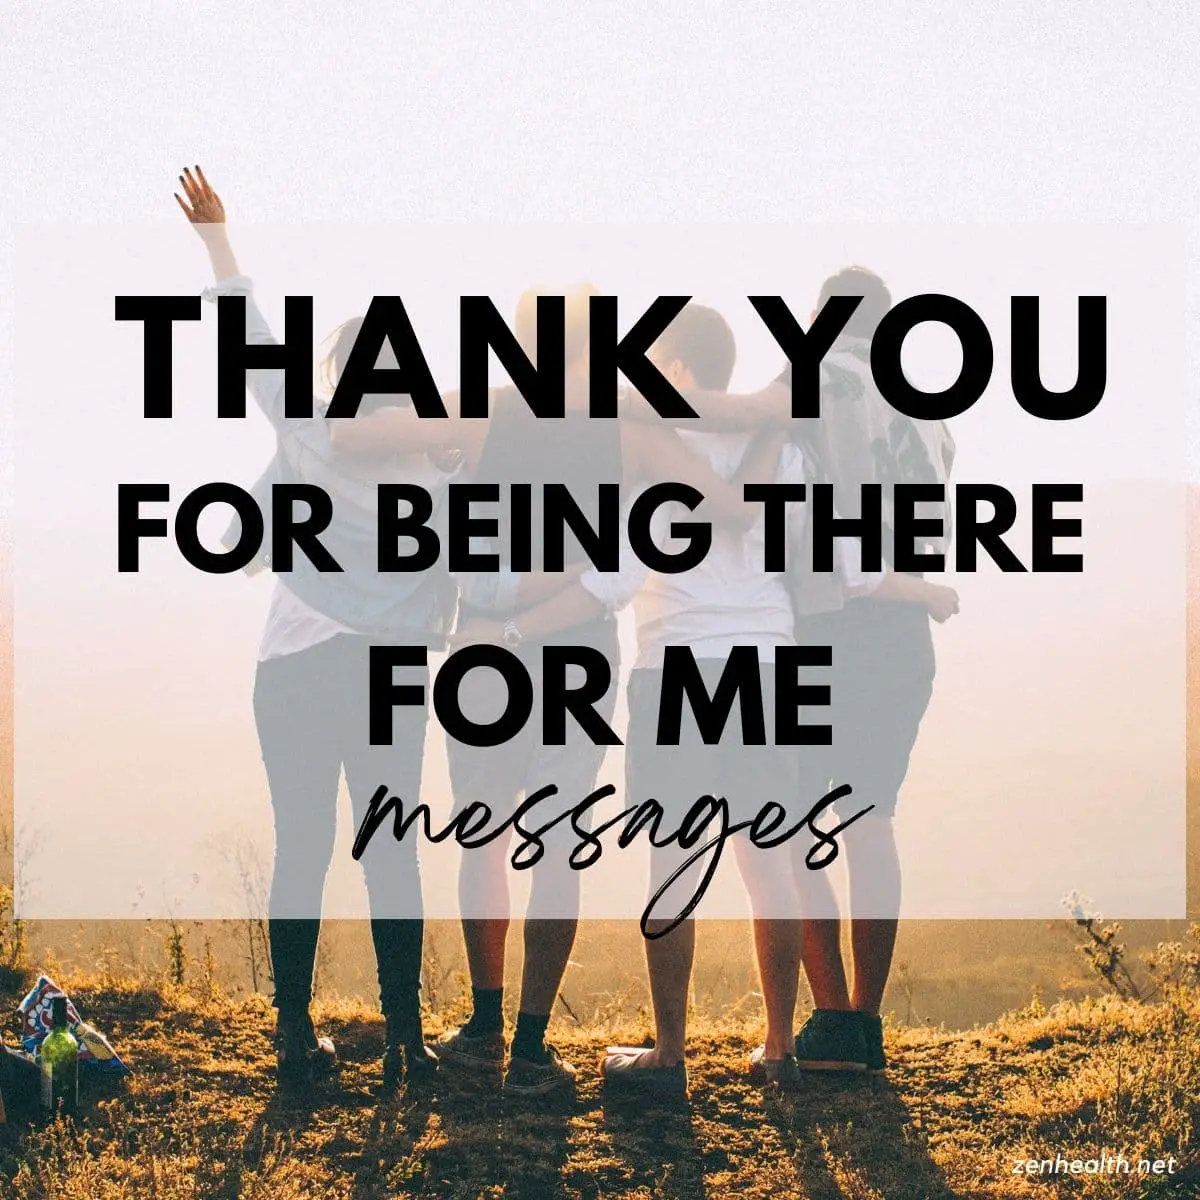 thank you for being there for me messages text overlay on a photo of four people hugging